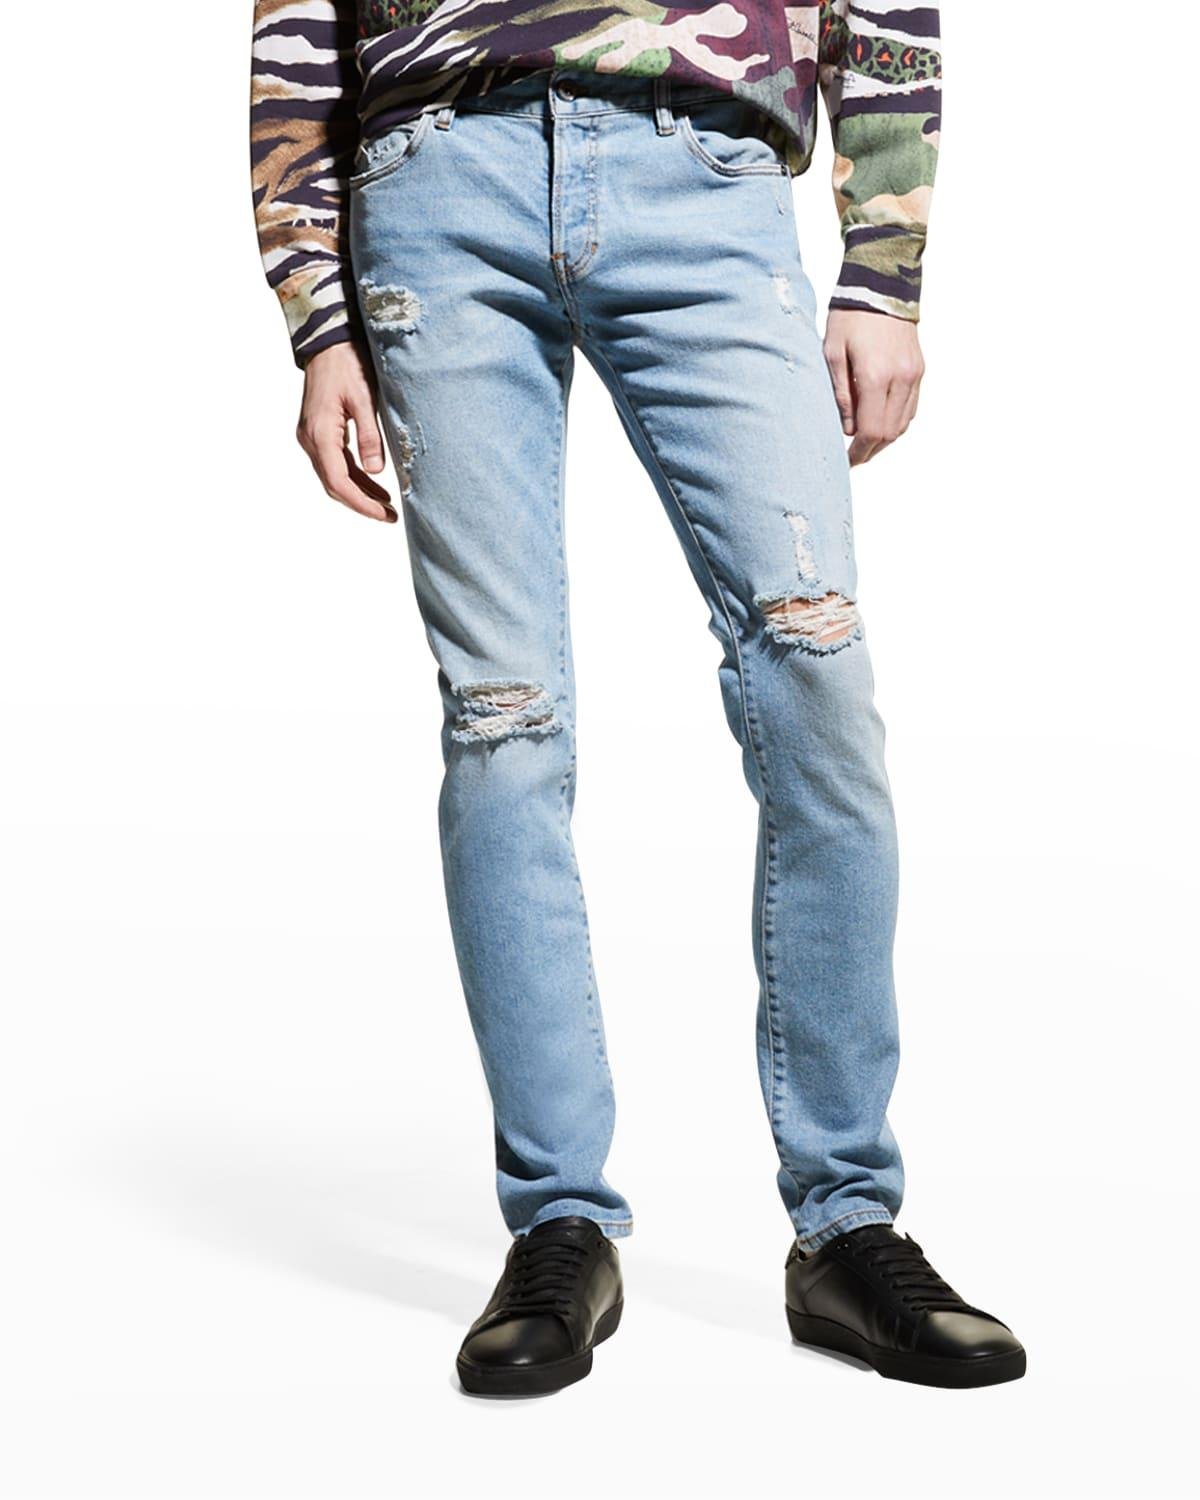 Men's Slim-Fit Destroyed Jeans by JUST CAVALLI